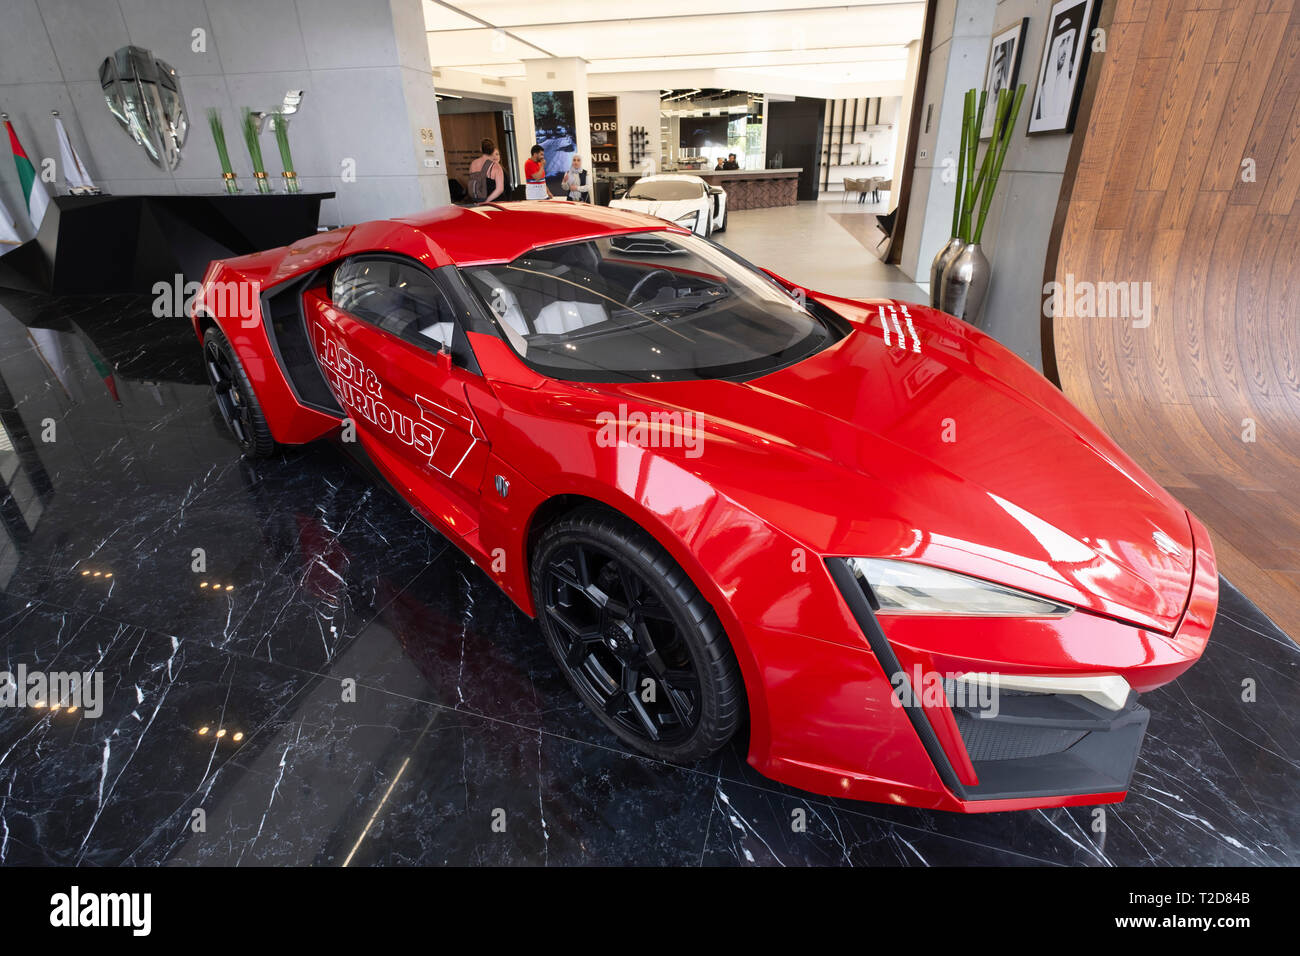 Red Lykan Hypersport supercar by W Motors that was used on Furious 7 film, Dubai, United Arab Emirates Stock Photo